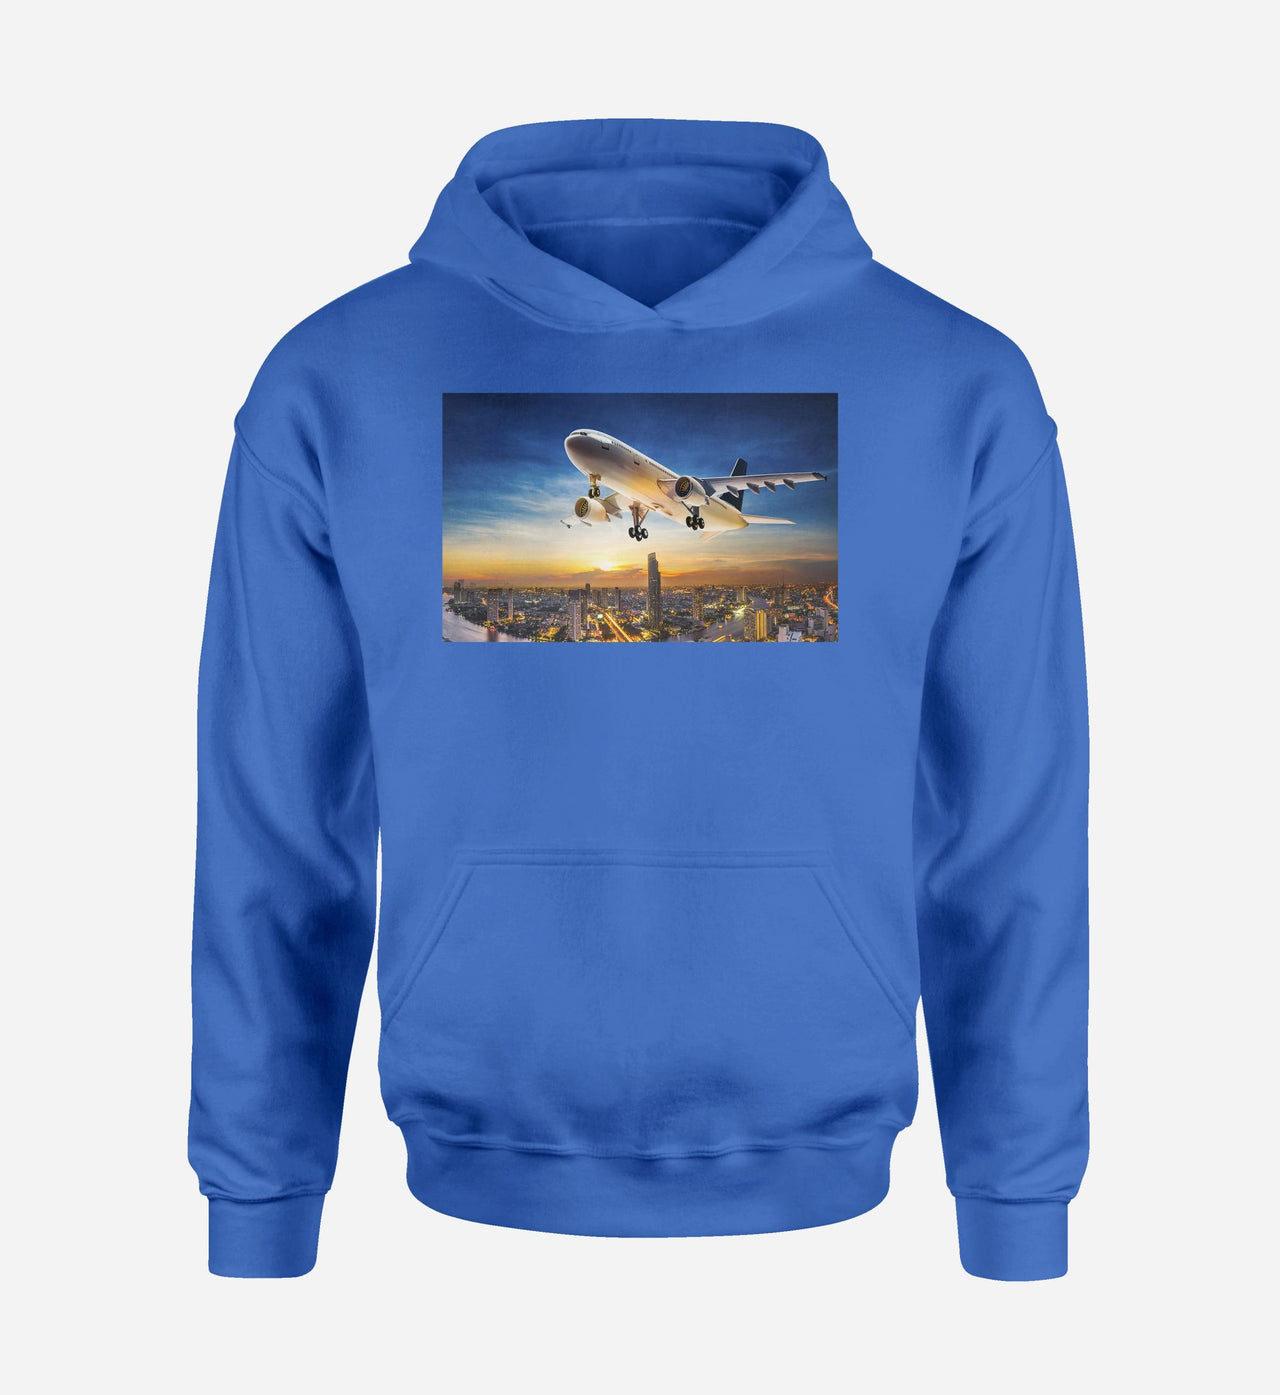 Super Aircraft over City at Sunset Designed Hoodies